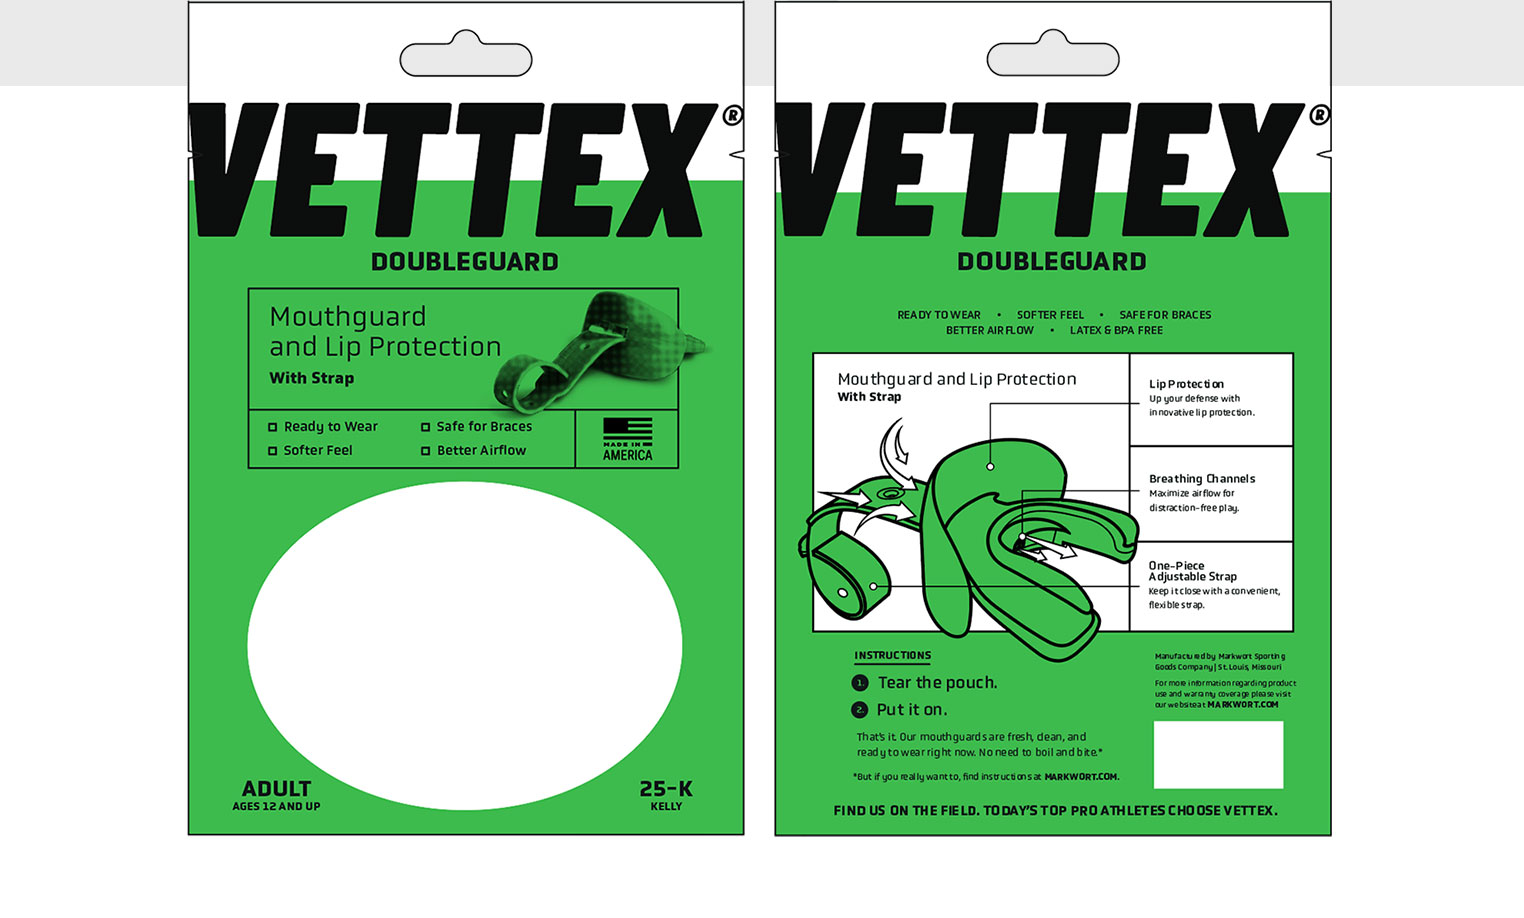 The new Vettex mouthguard packaging design